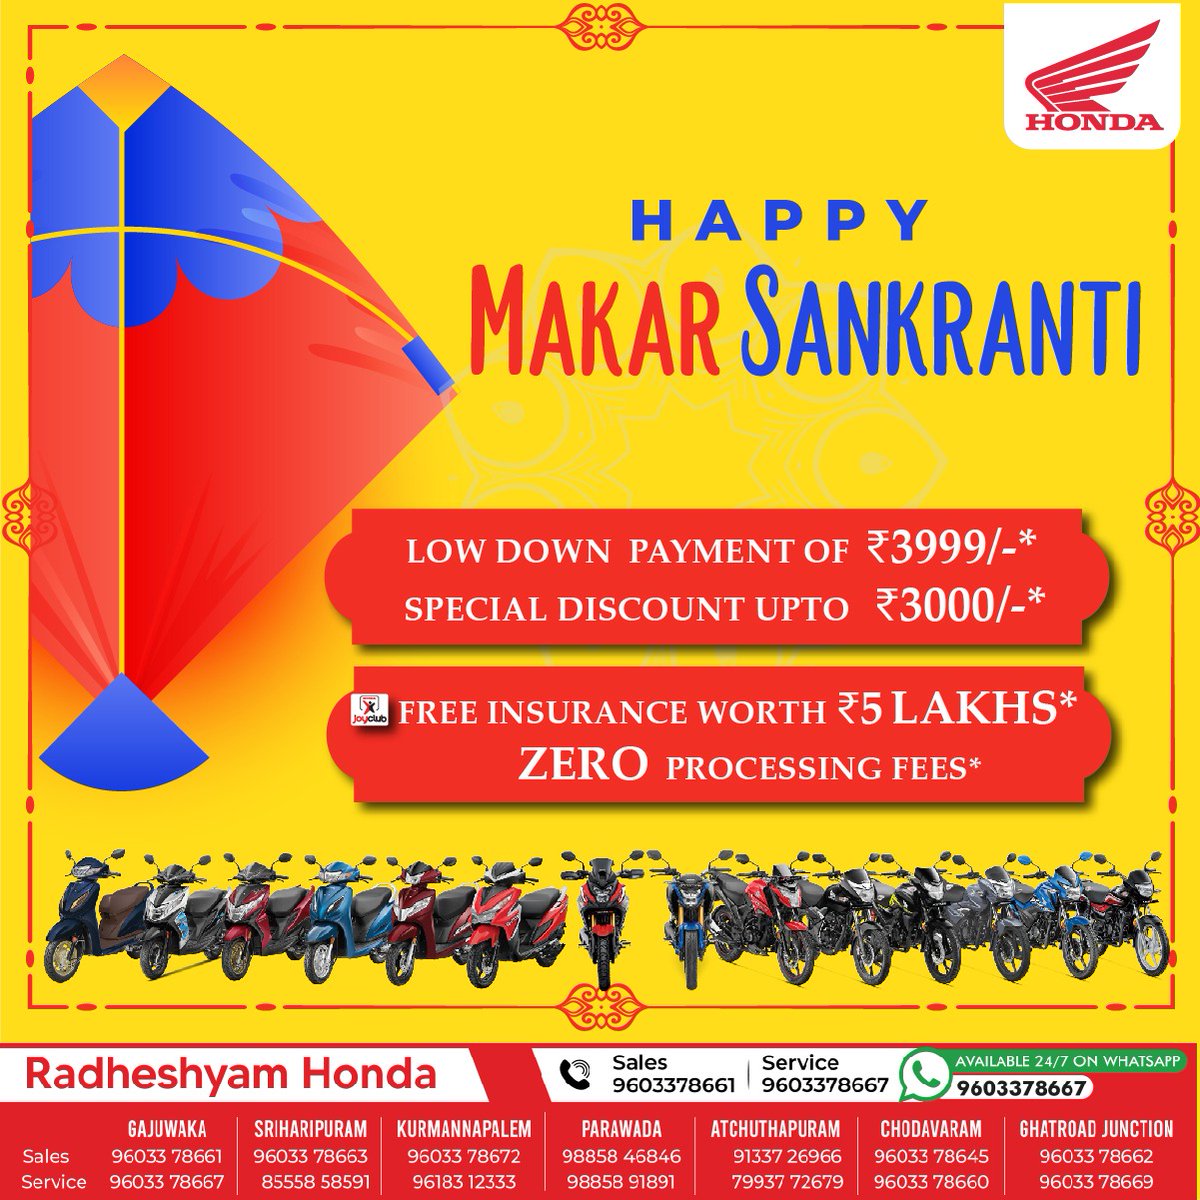 Happy Makar Sankranti! Let's embark on new adventures and experiences together on your trusty Honda 2-wheeler. May this day bring fresh beginnings and joy.
Buy #HondaBikes or #HondaScooters  at a Low Down Payment of ₹3999/-, Zero Processing Fees,